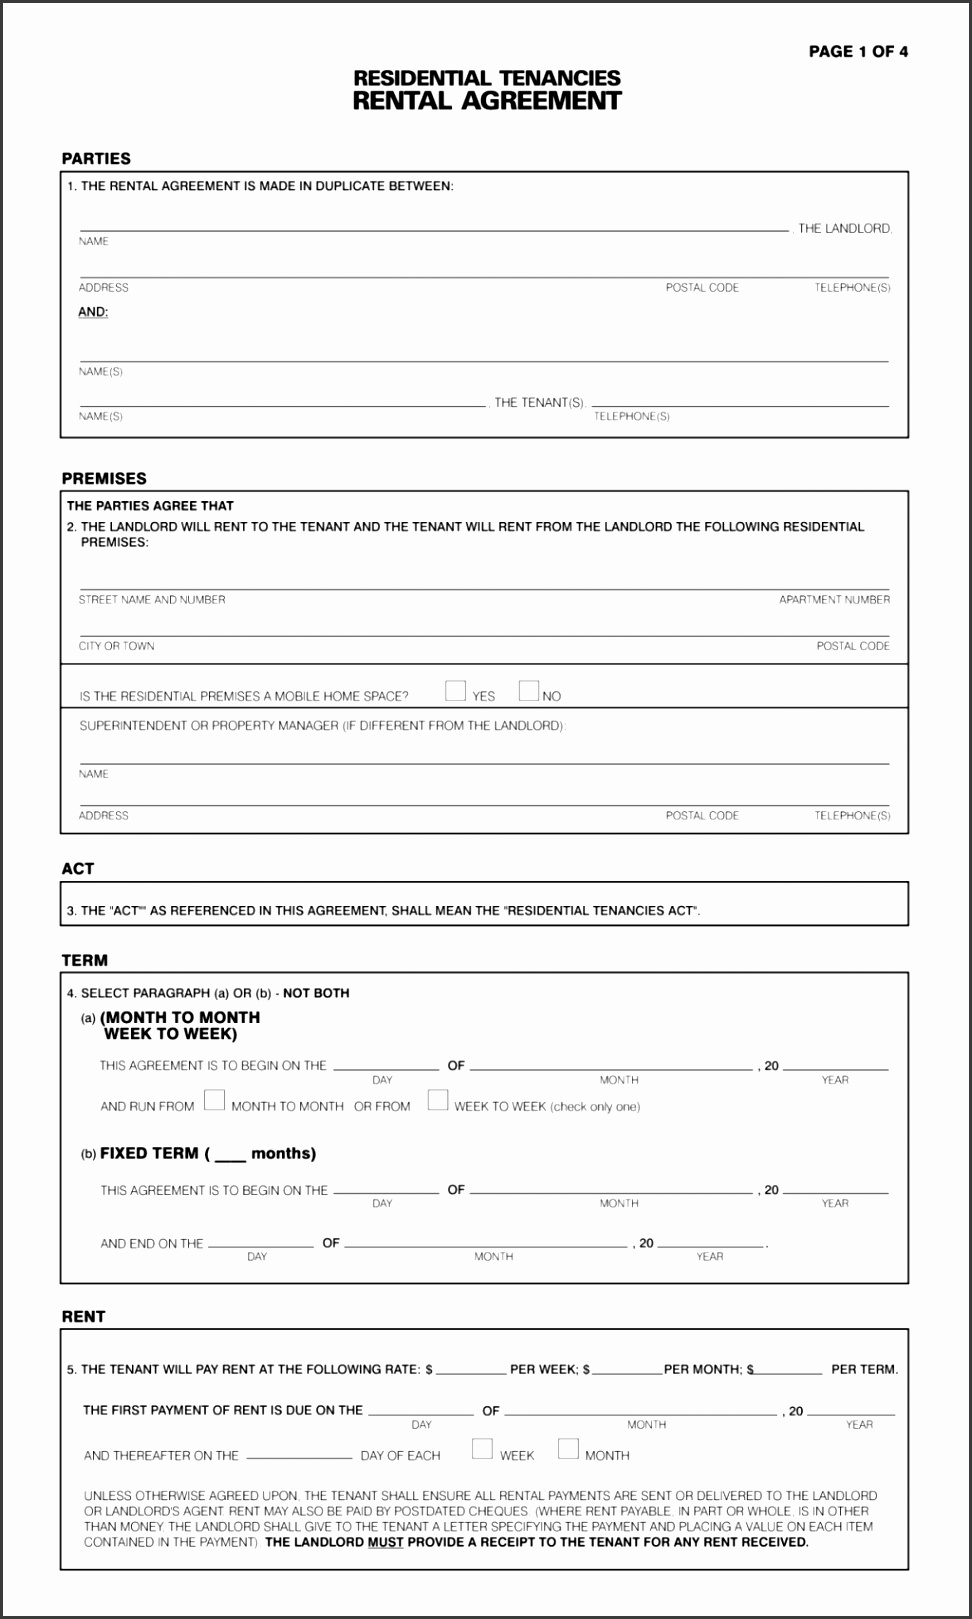 Apartment Agreement Invoice Template Best Free Blank Lease Forms 1224x2016 Receipt Payment Sample Tenancy Doc